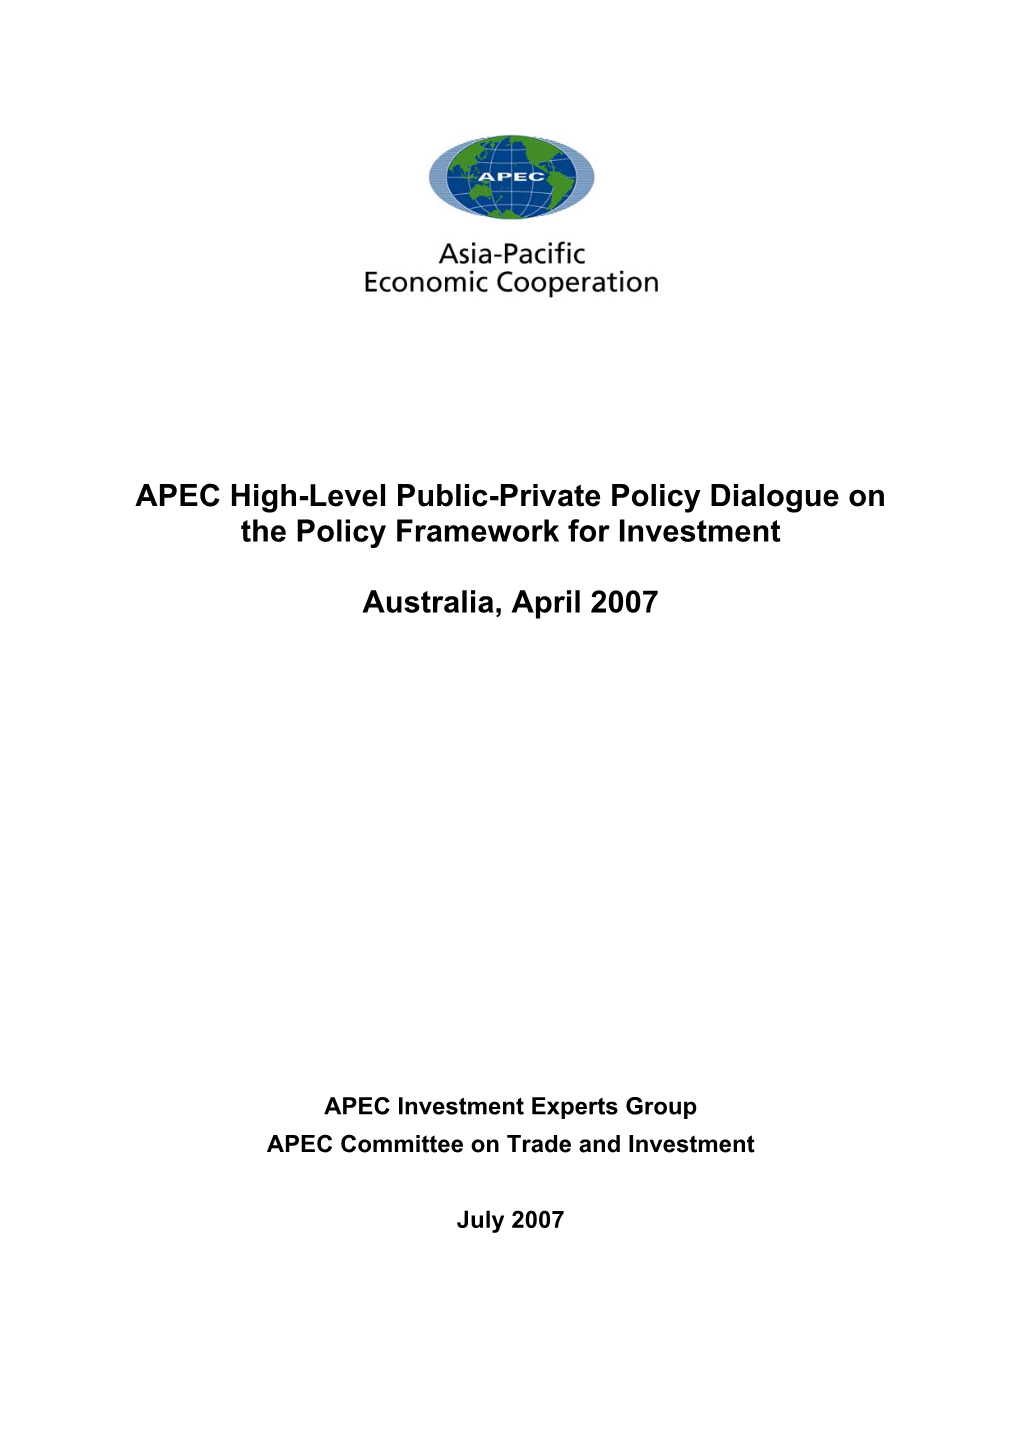 Public-Private Policy Dialogue on the Policy Framework for Investment